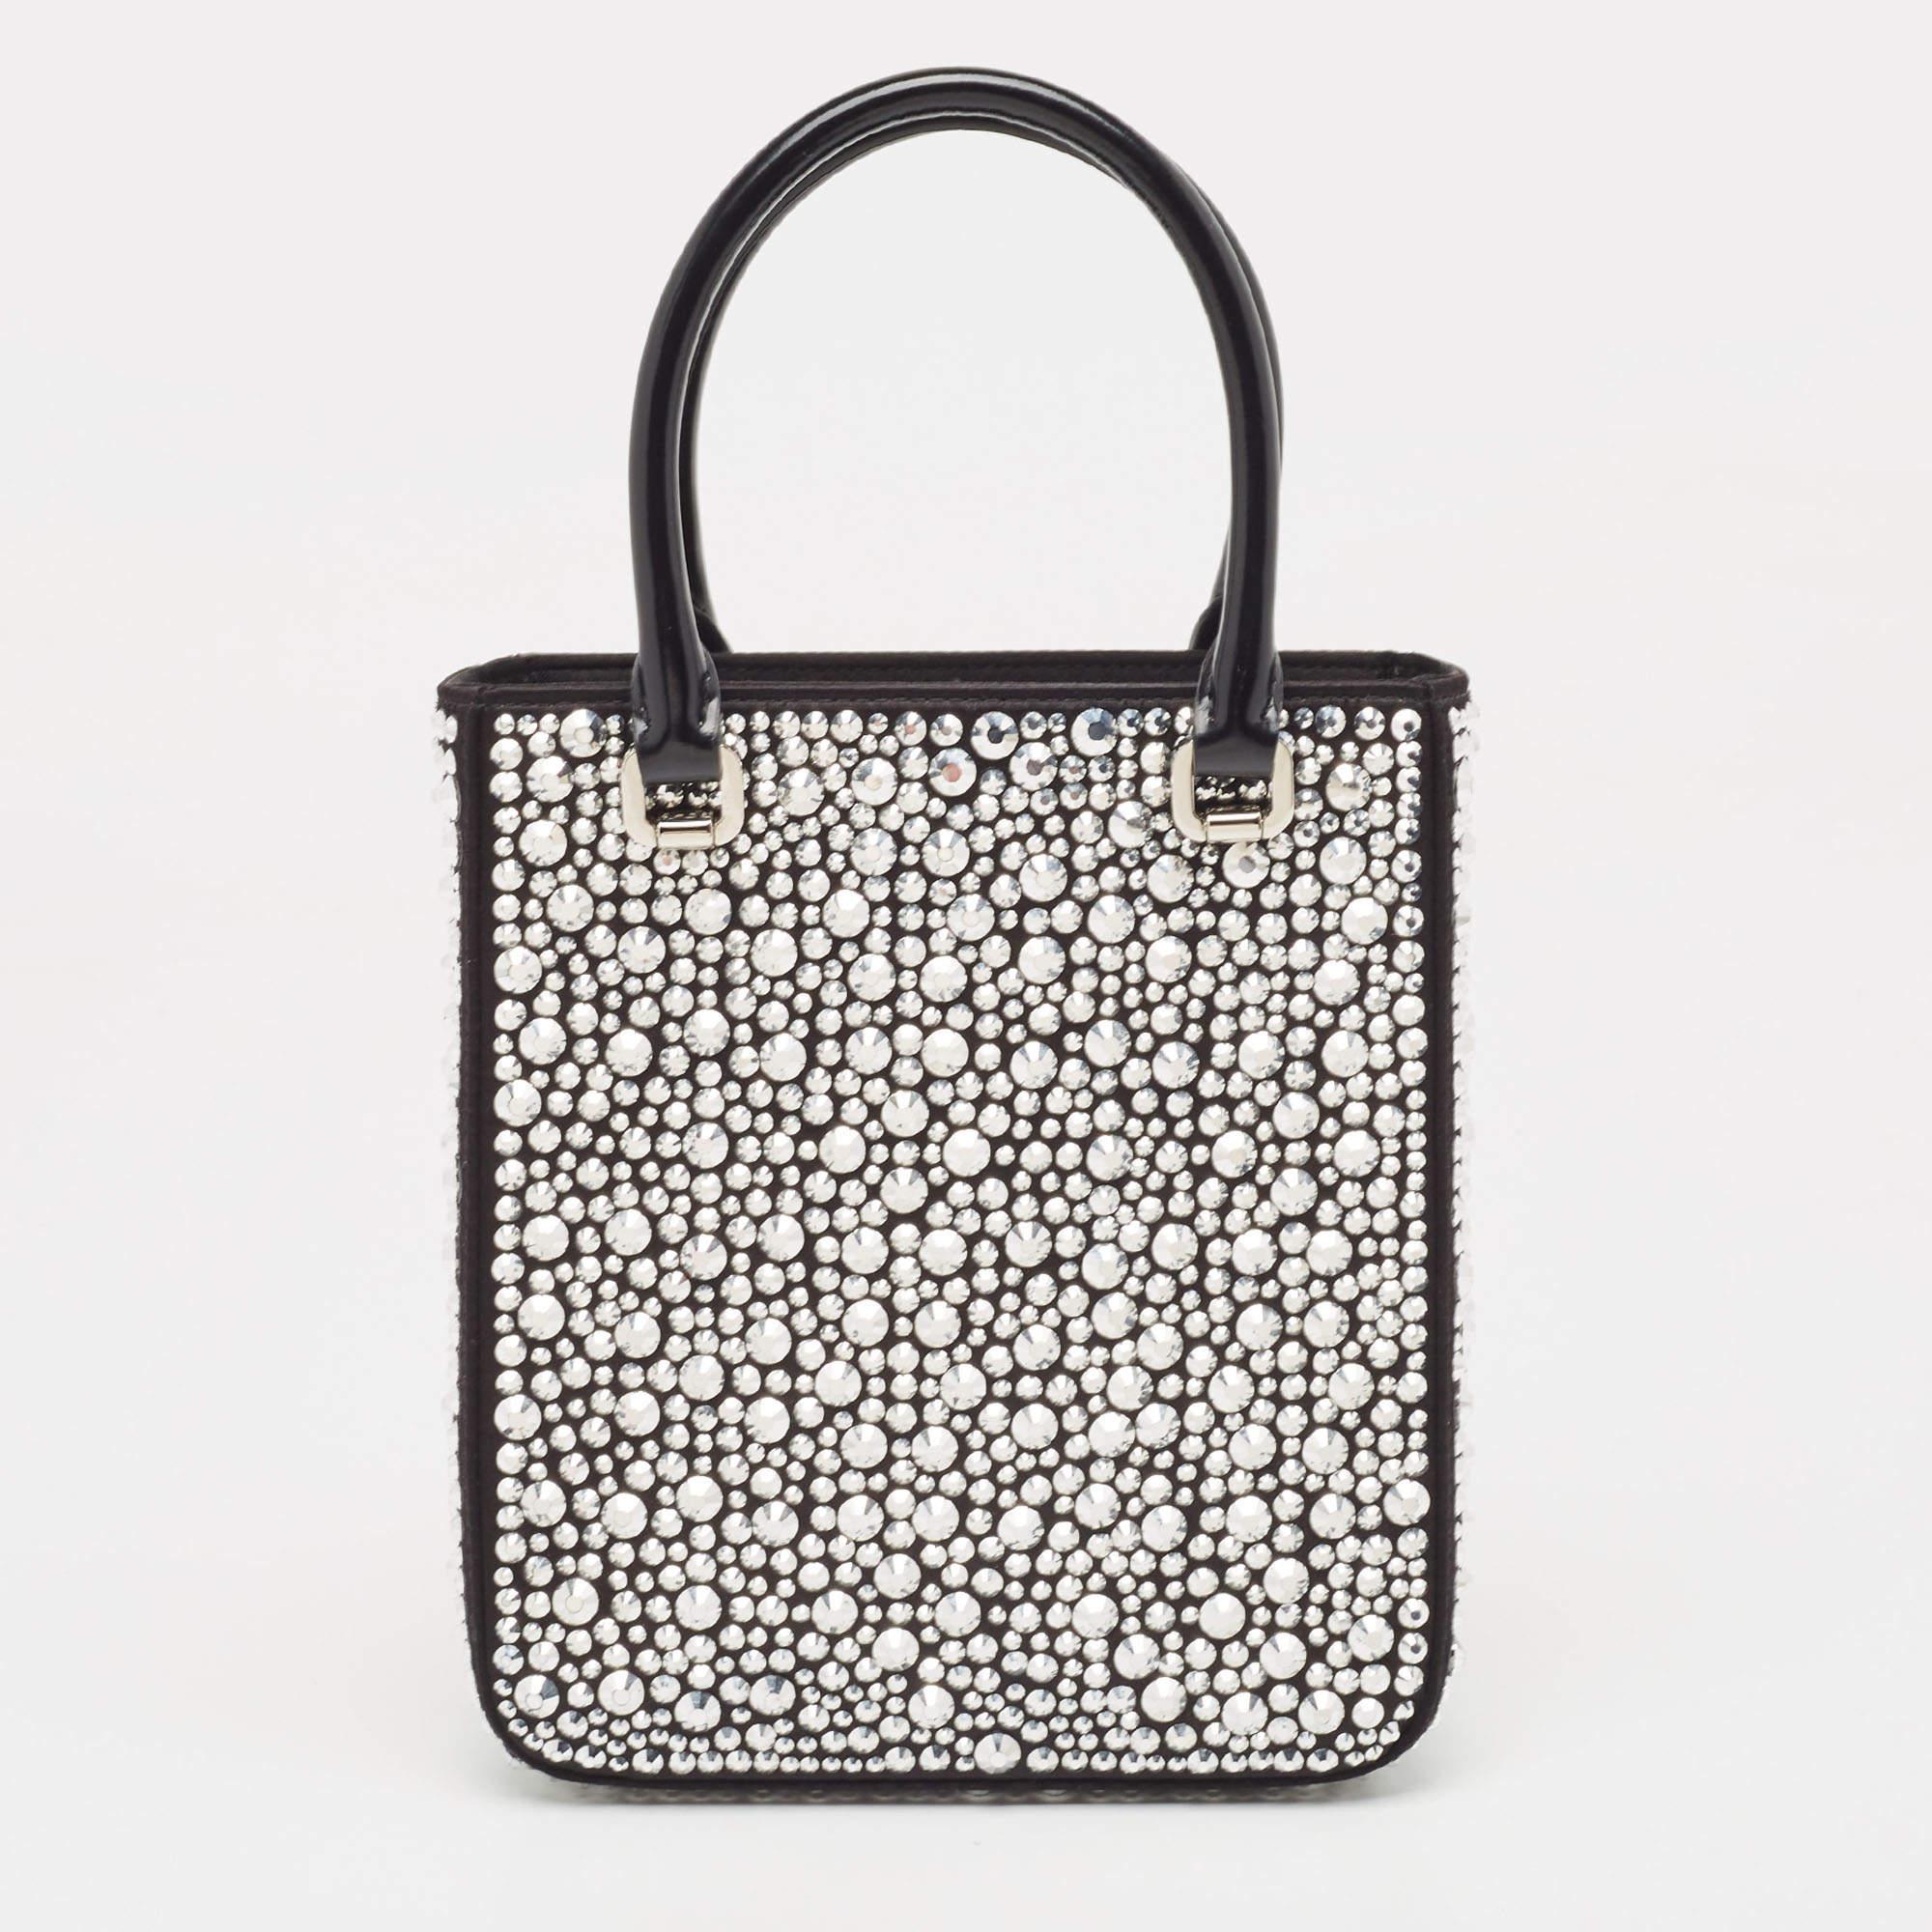 Prada Black Satin and Leather Small Crystal Embellished Tote 4